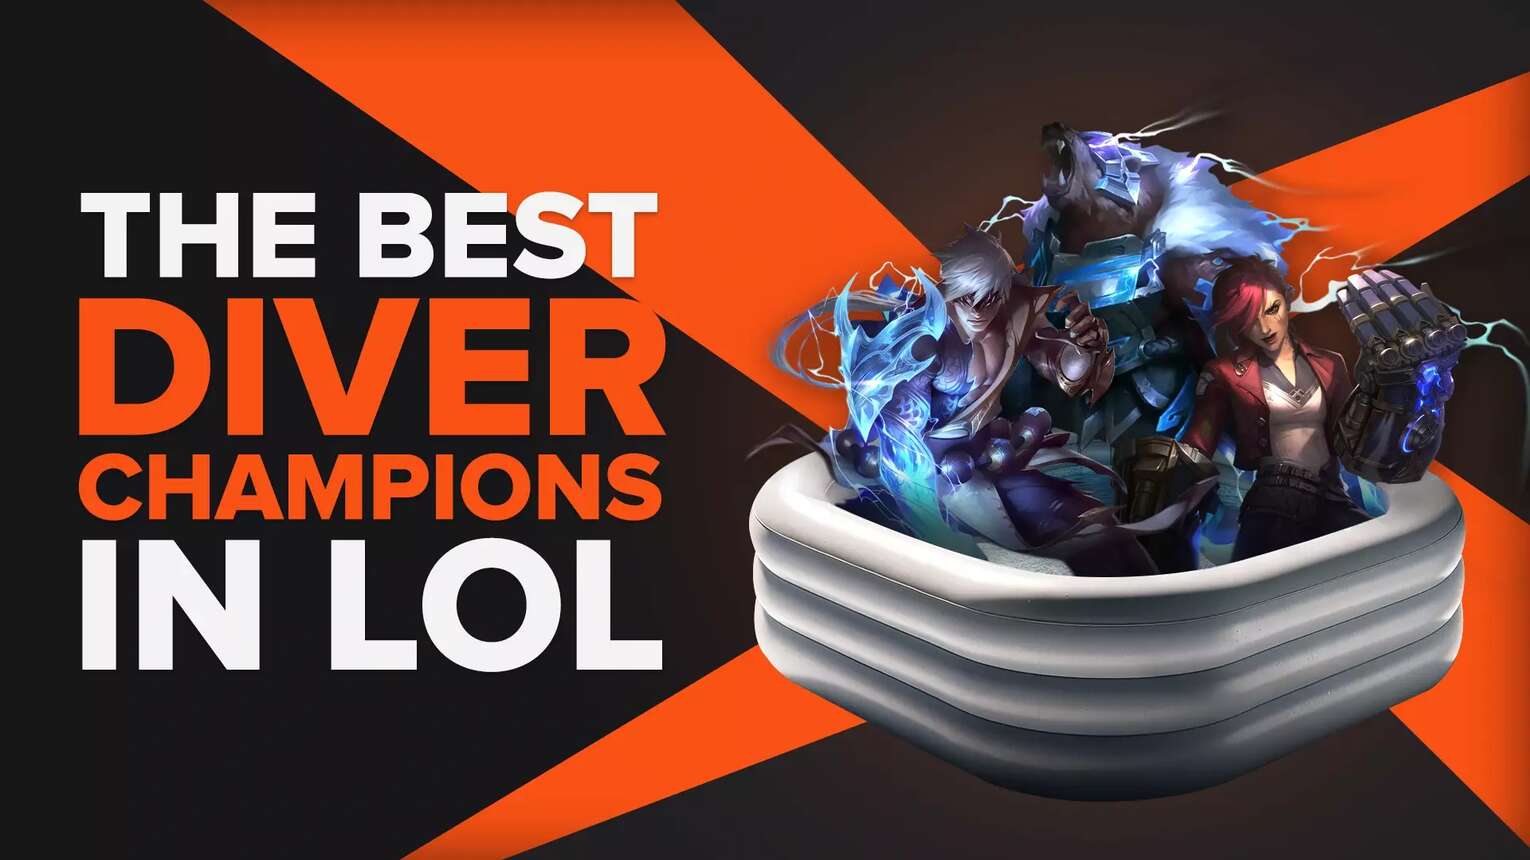 Top 8 Best Divers to Carry Games in LoL SoloQ